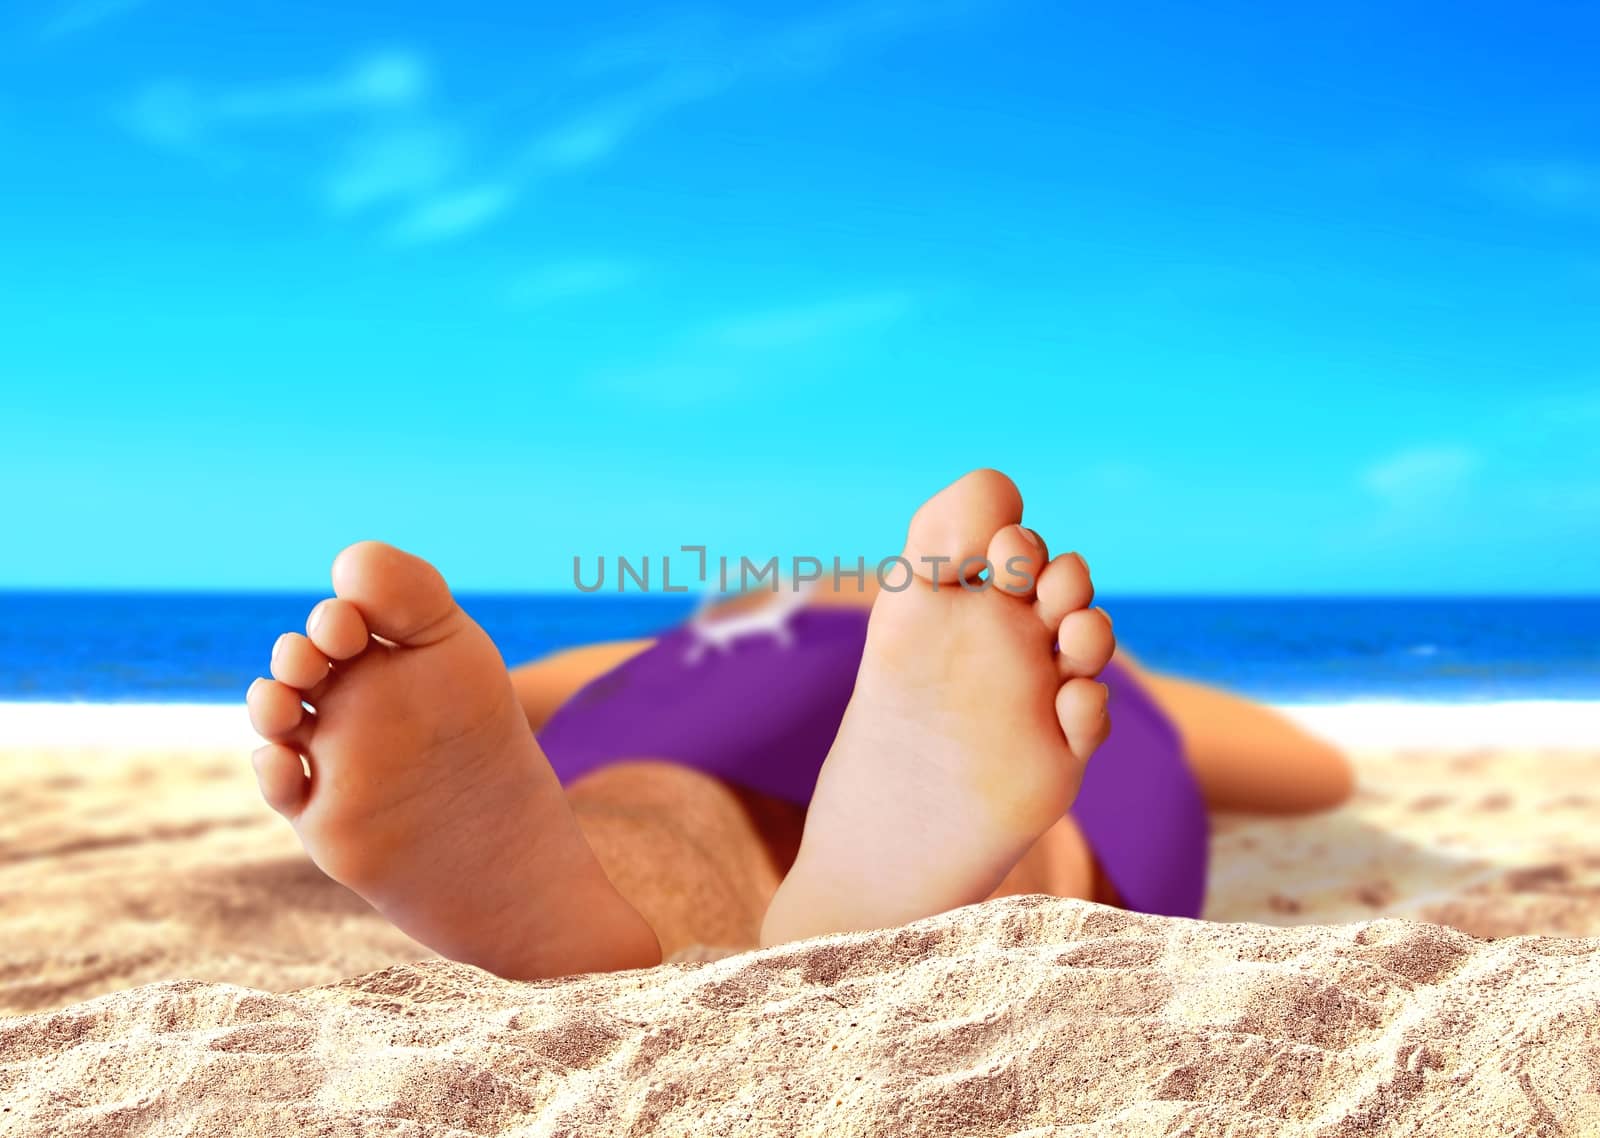 Men Feet at the Beach by razihusin